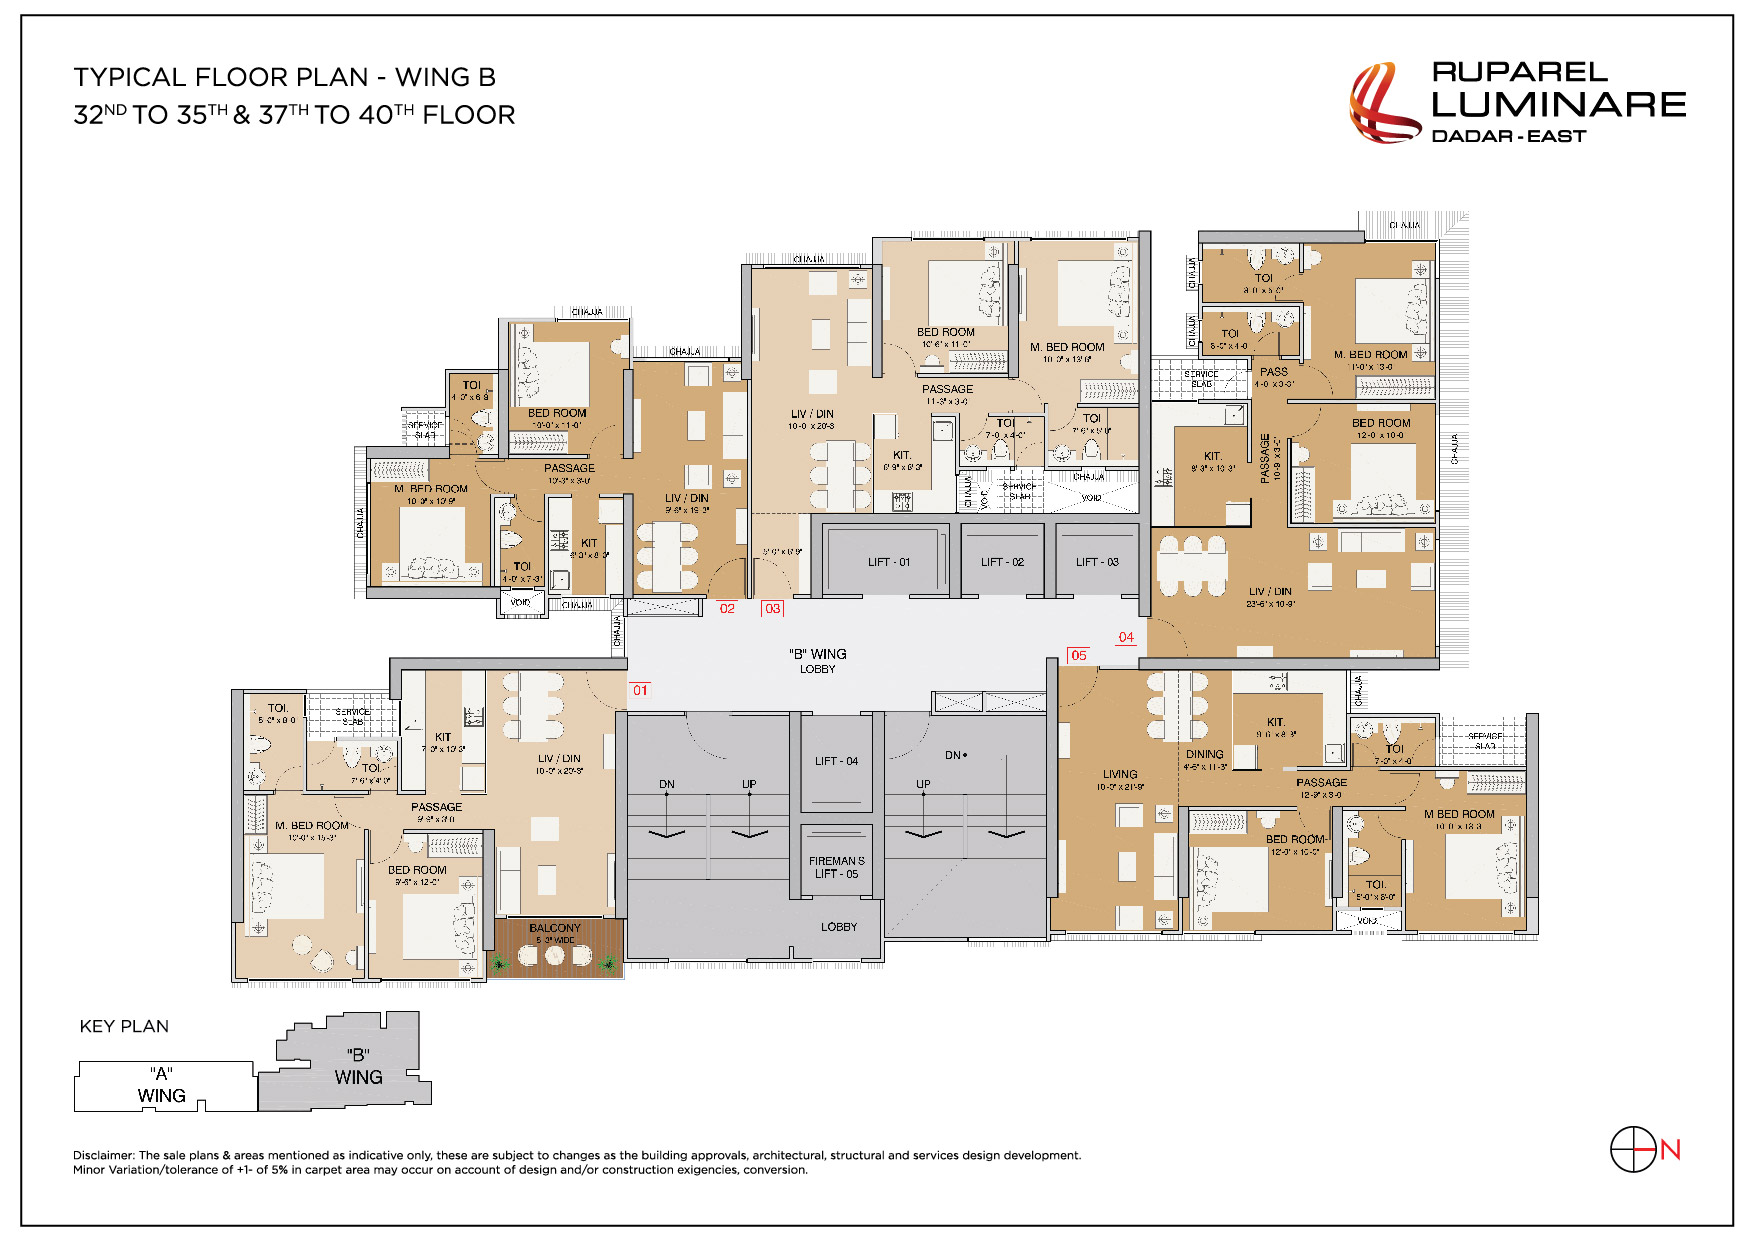 1 BHK A Wing